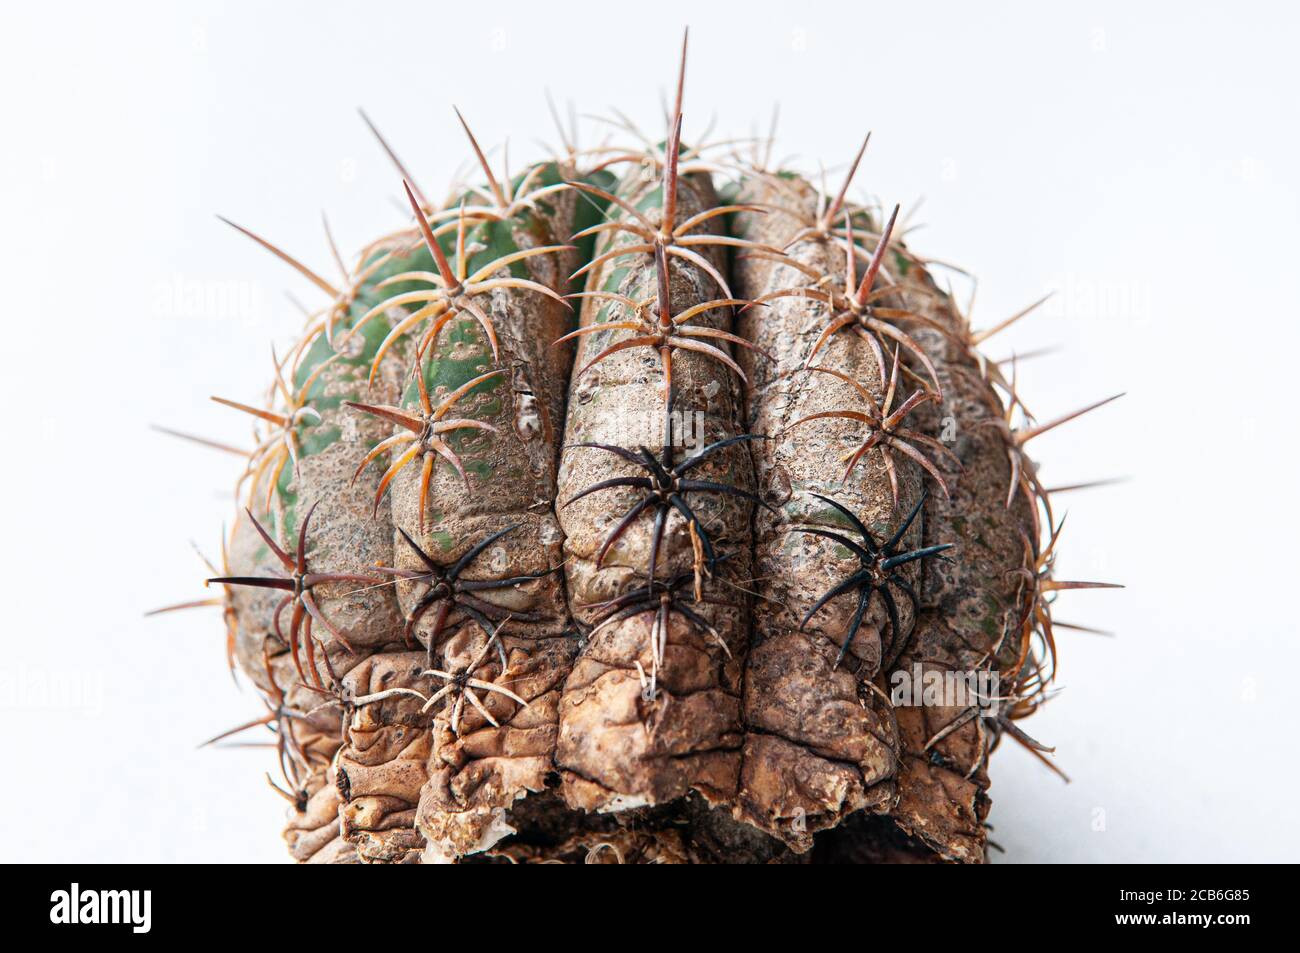 Cactus disease dry root rot caused by fungi, severe damage fungi infected Gymnocalycium cactus isolated on white background showing serious damge at s Stock Photo